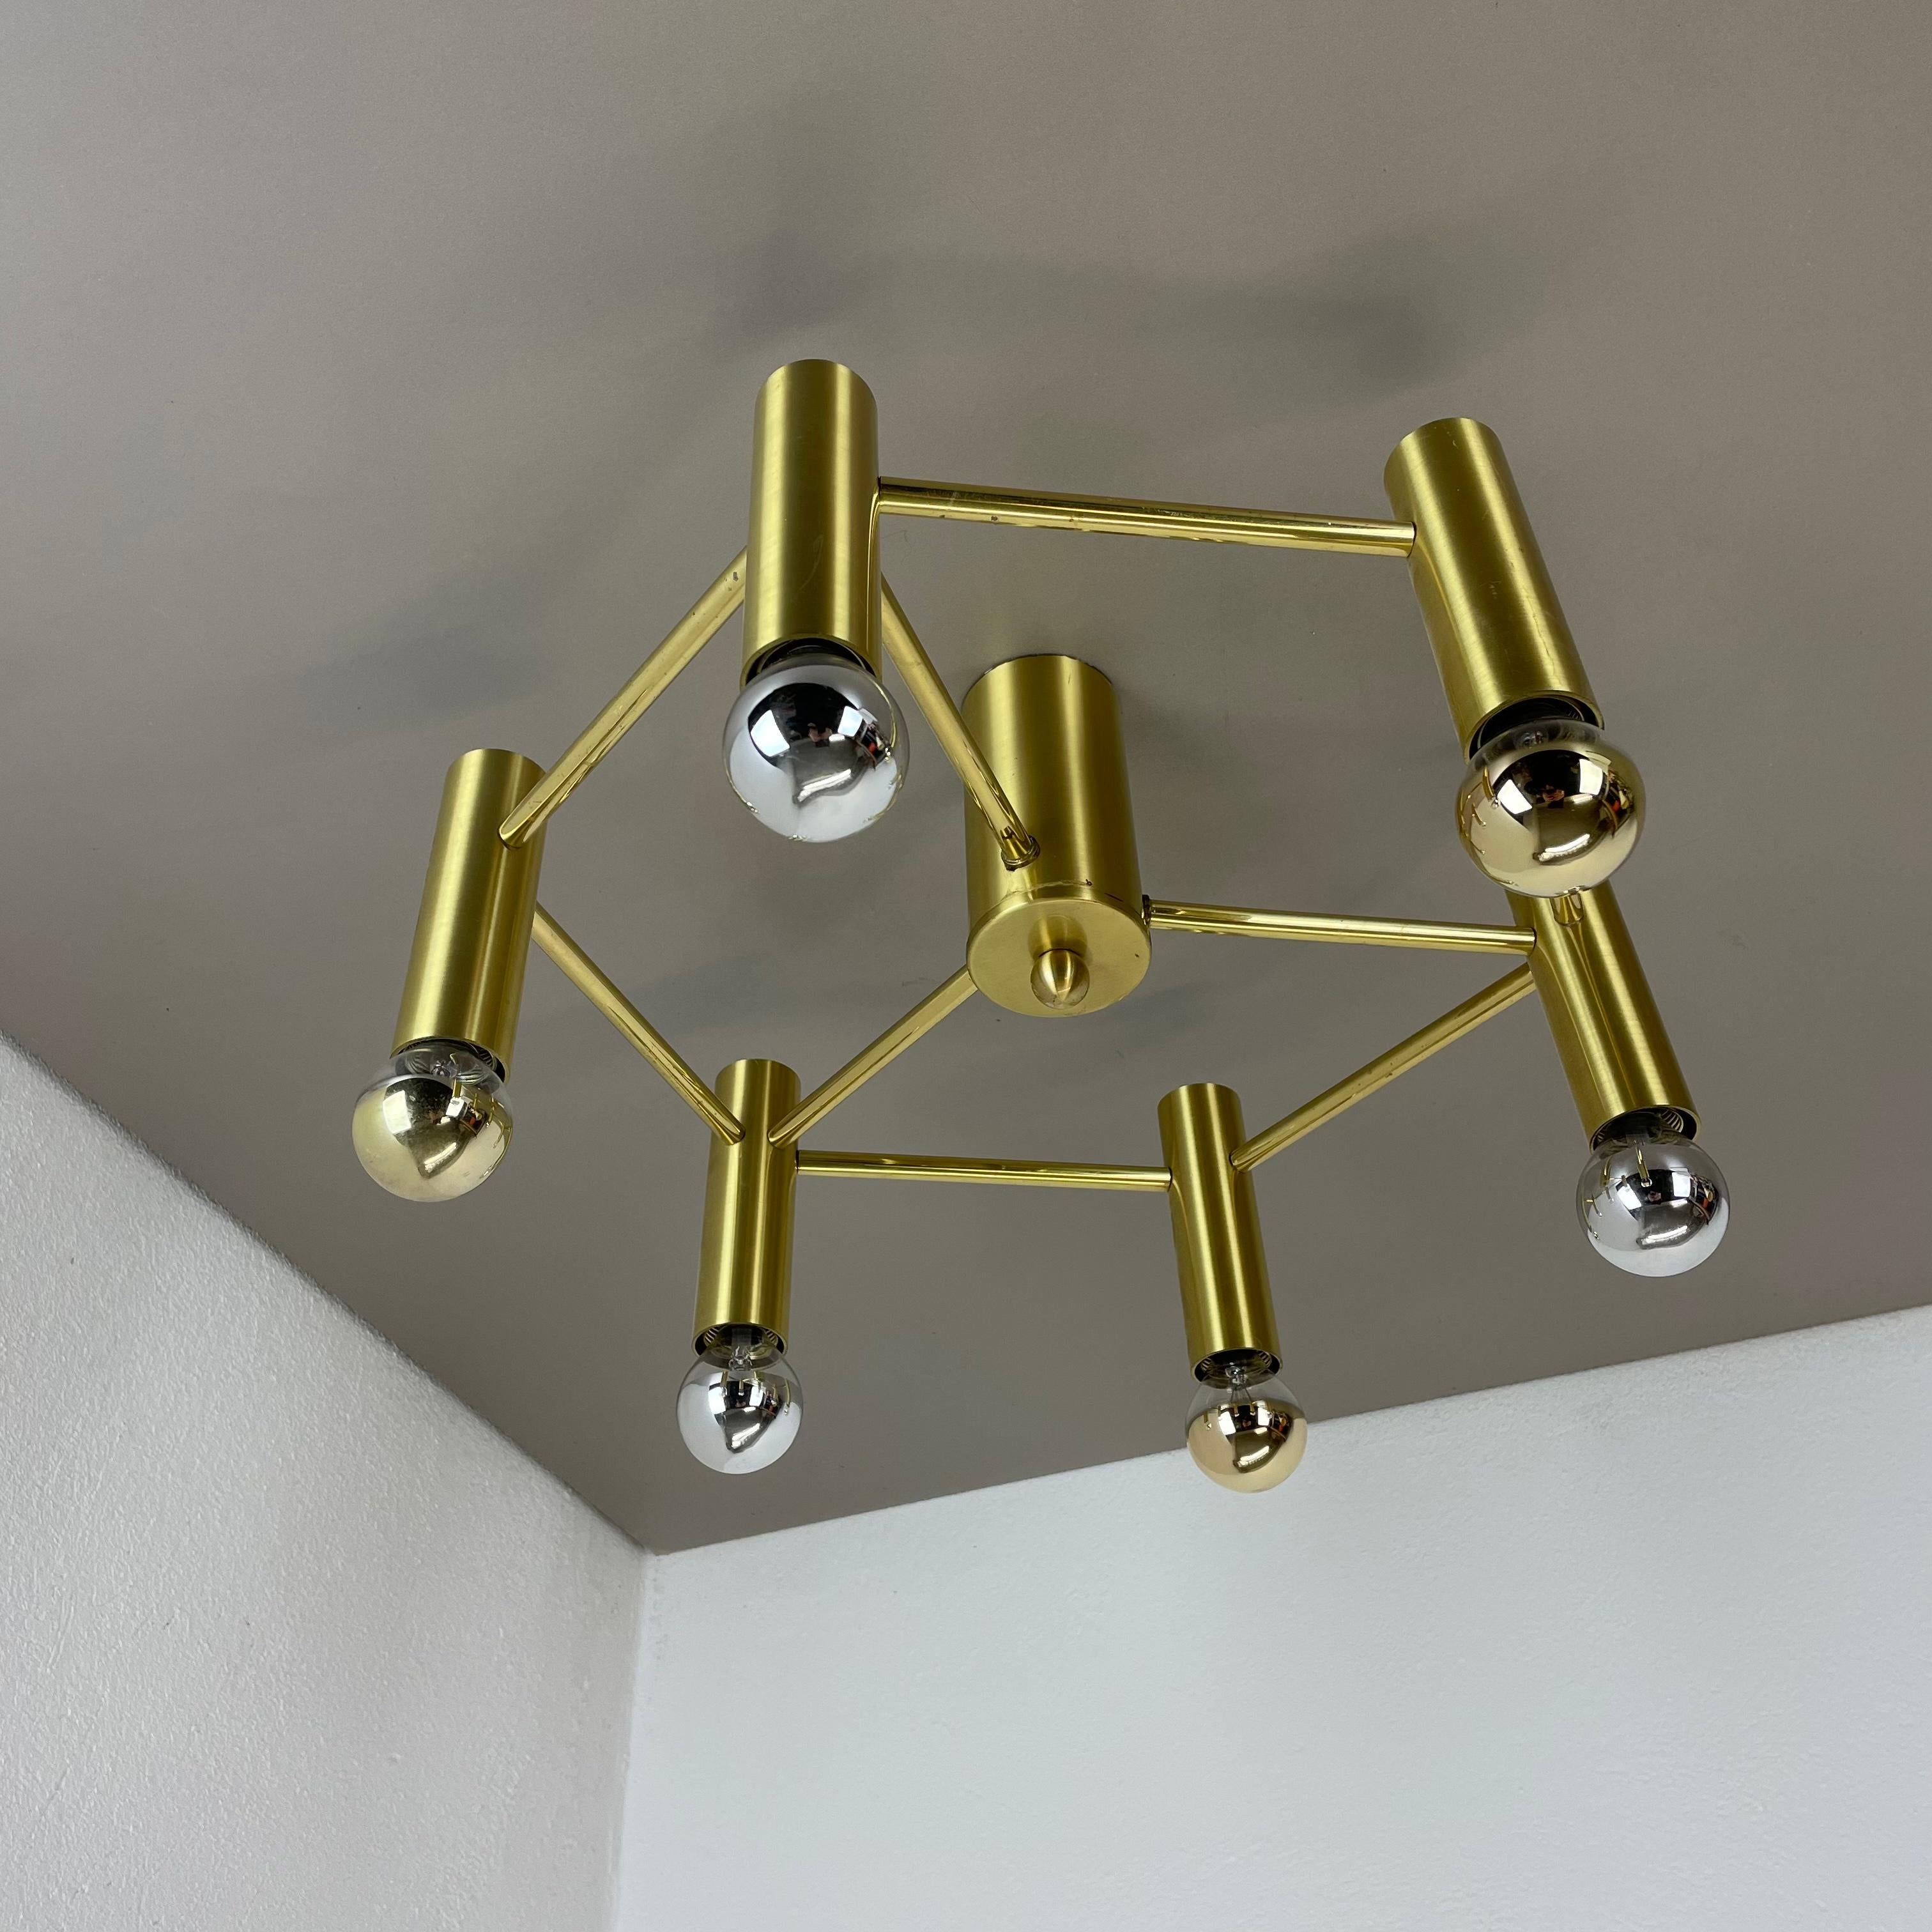 Brass Italian Stilnovo Style Atomic Space Age Ceiling Light Sconces, Italy, 1970 In Good Condition For Sale In Kirchlengern, DE